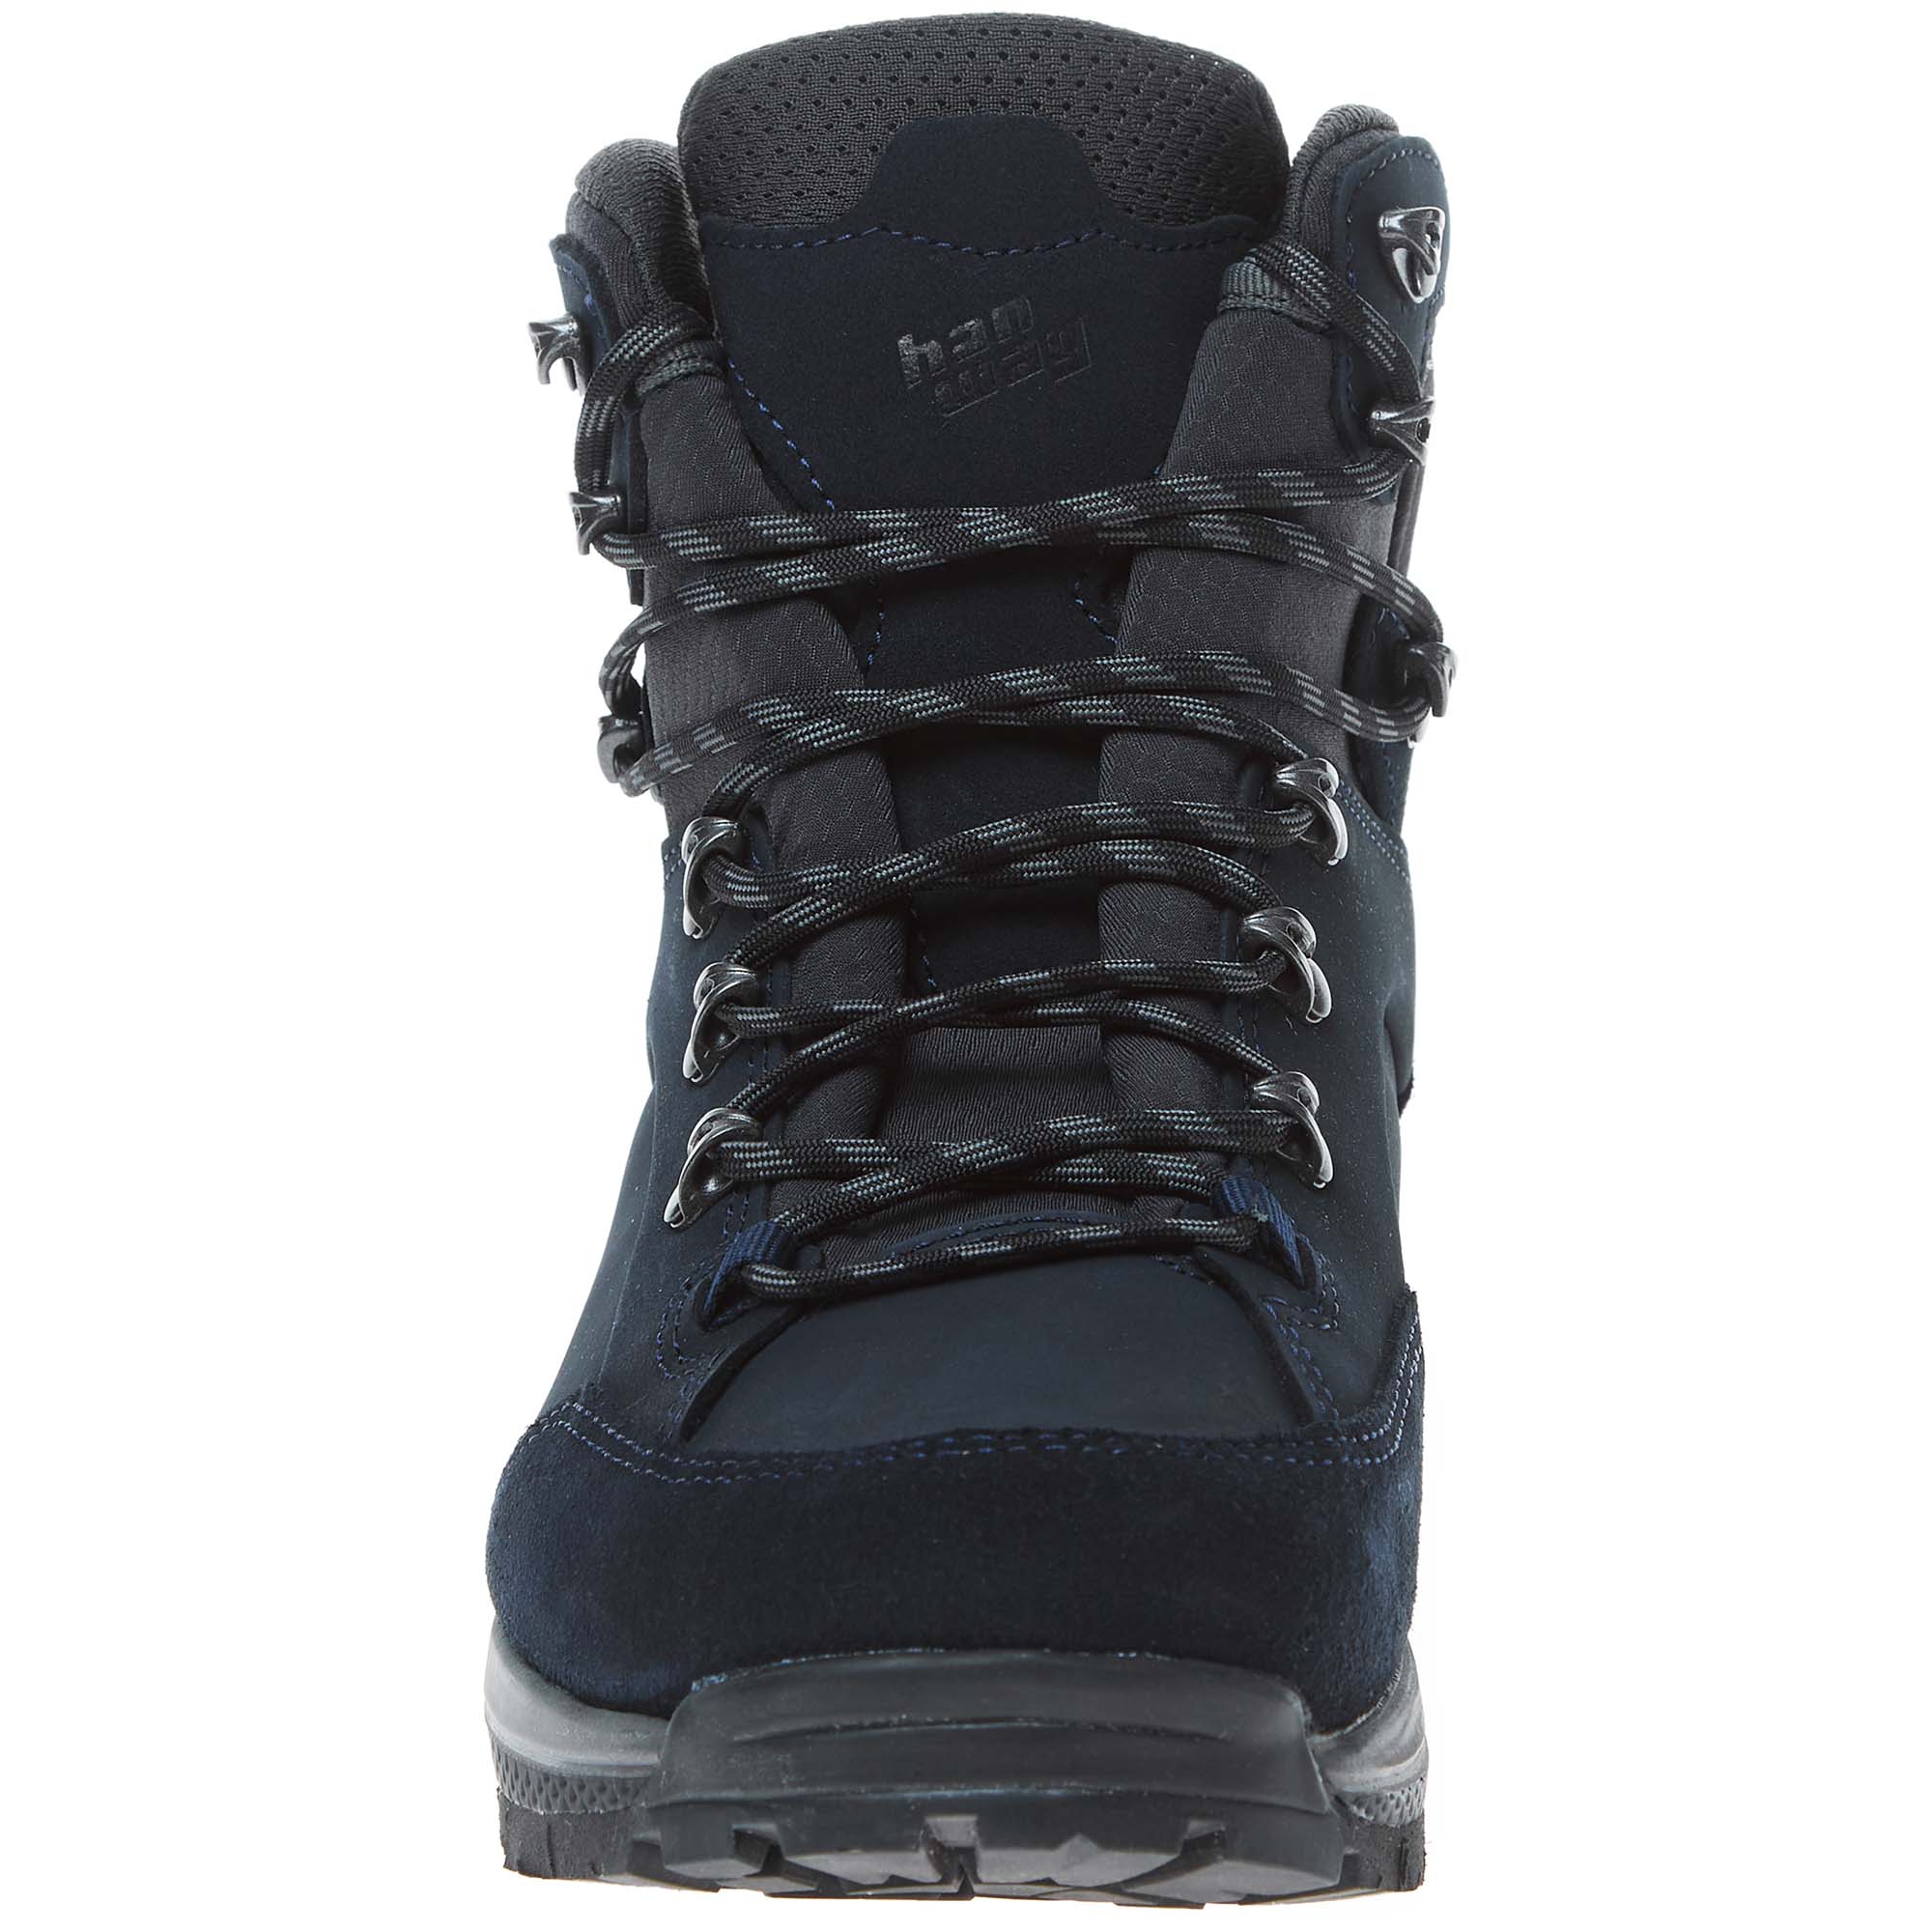 Hanwag Banks SF Extra GTX Women's Hiking Boots